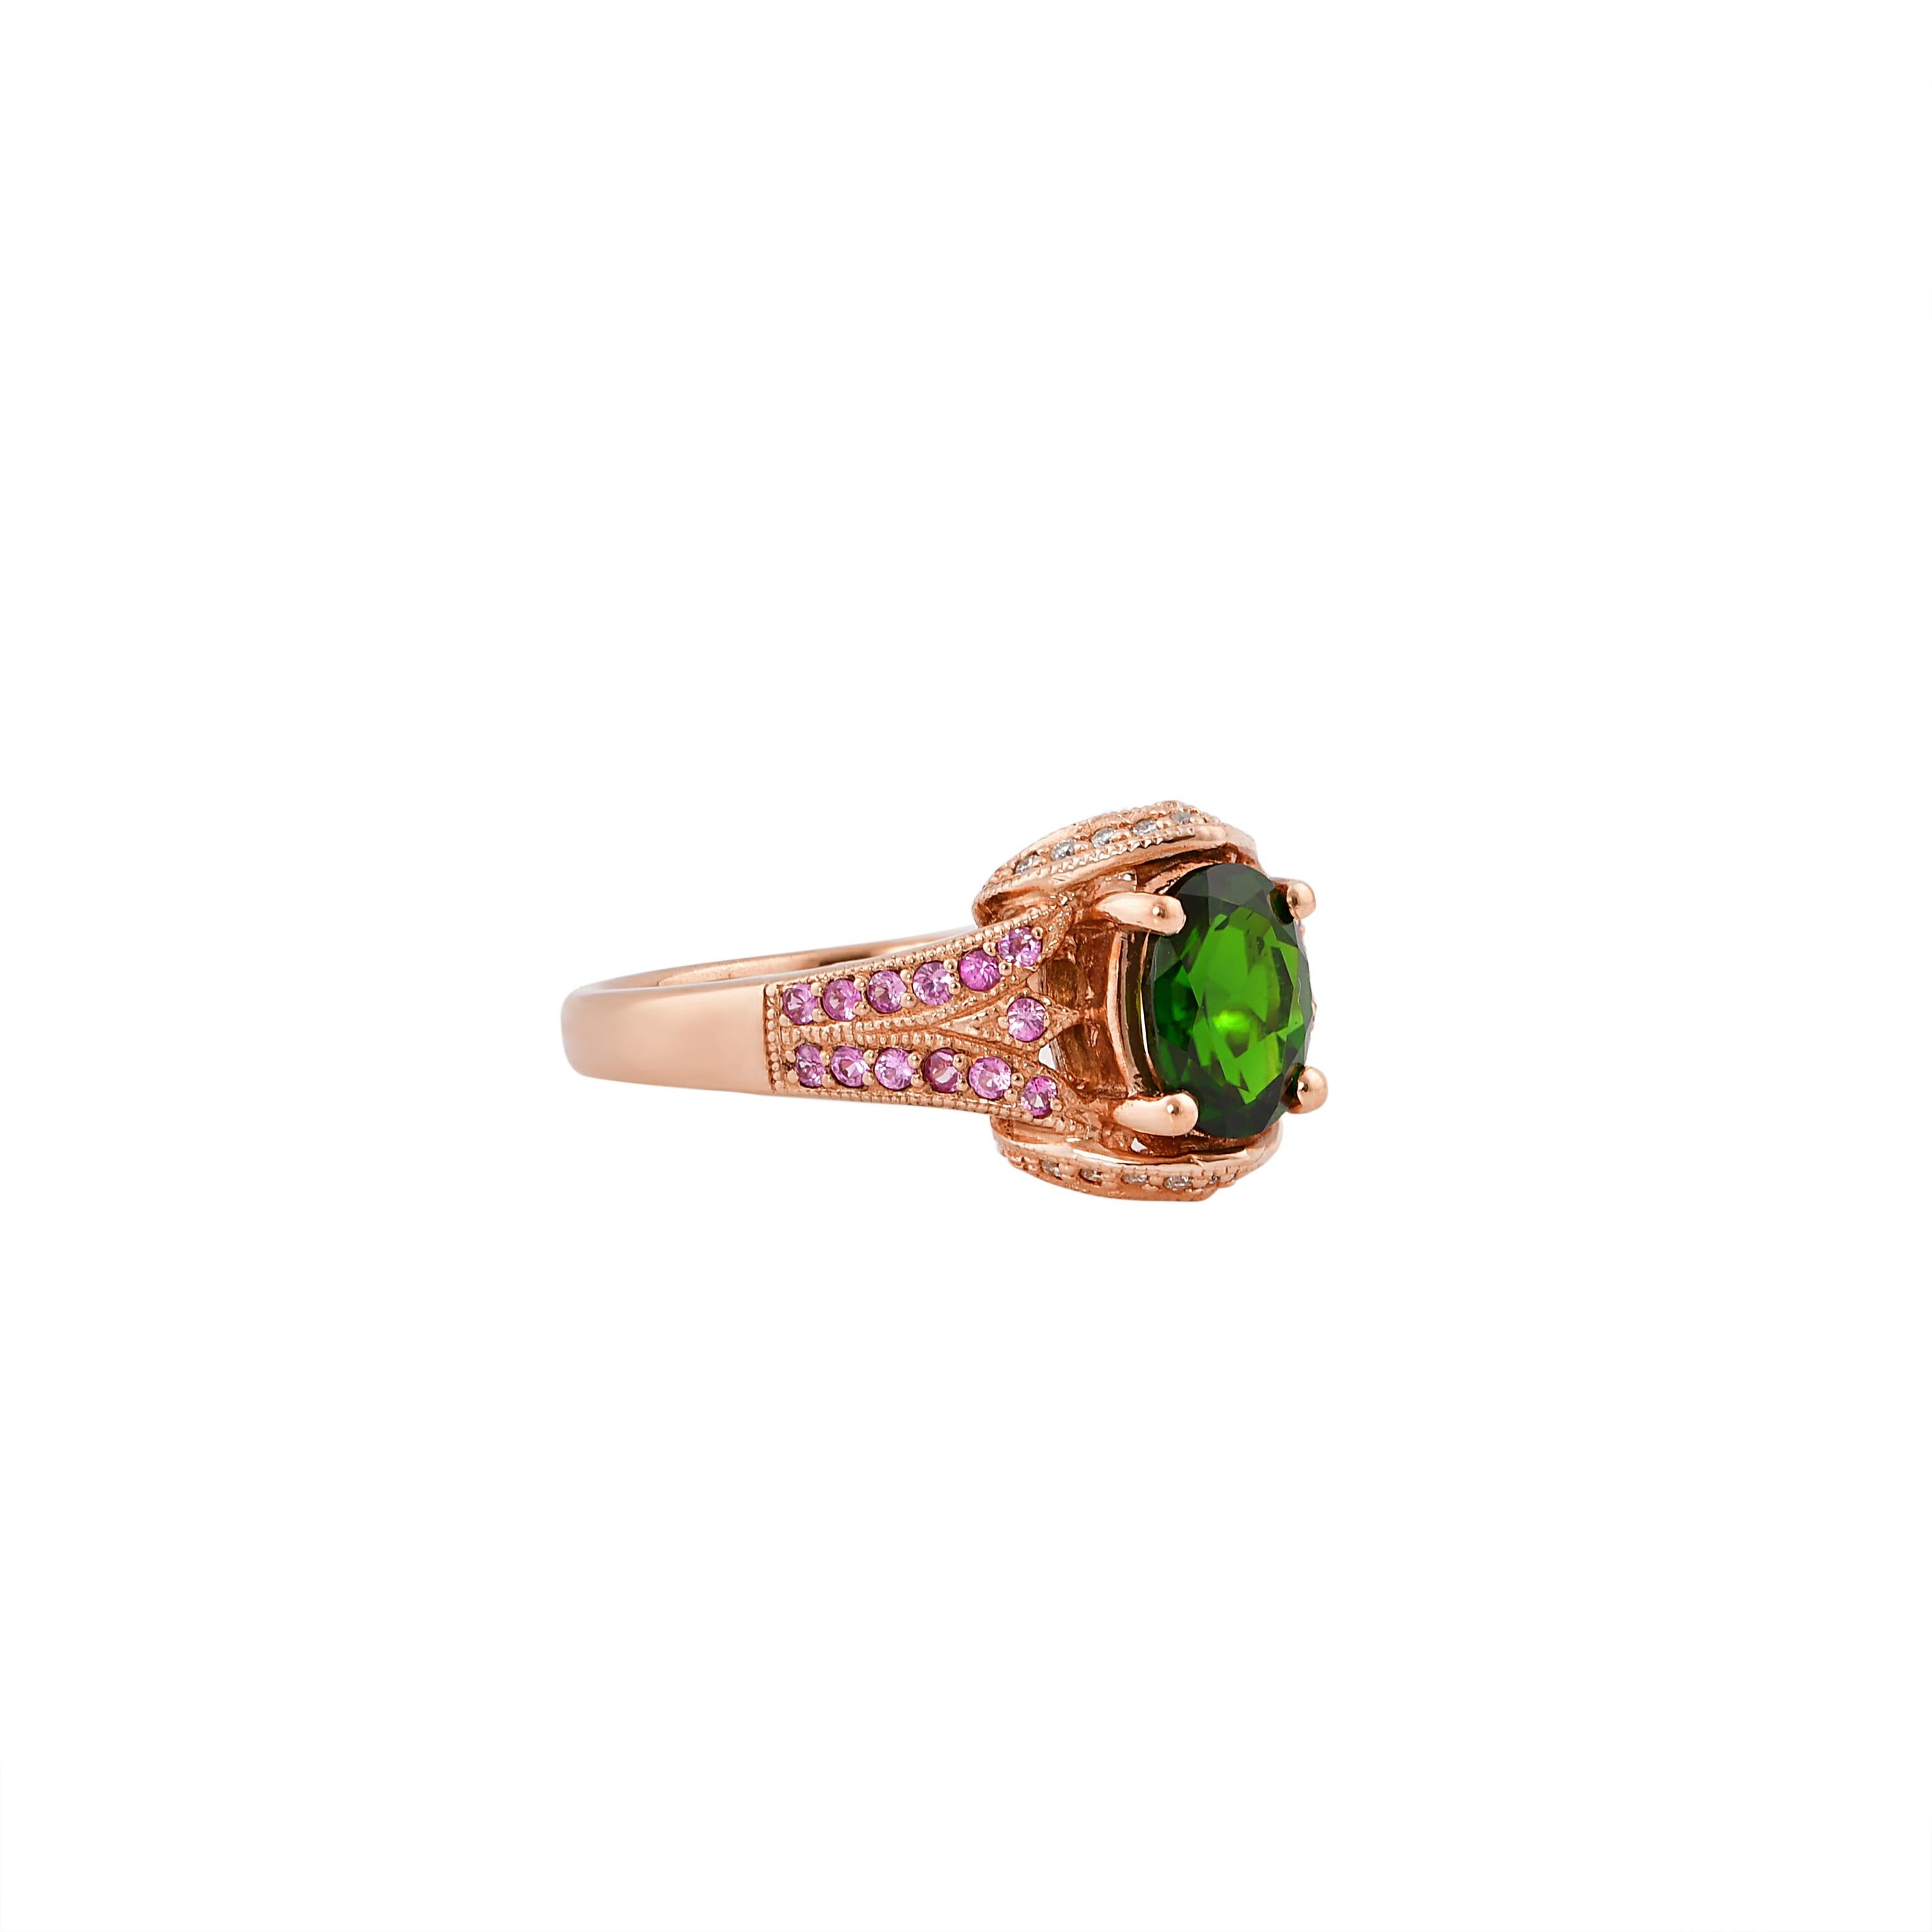 Unique and Designer Cocktail Rings by Sunita Nahata Fine Design.

Classic Chrome Diopside ring in 10K Rose gold with Sapphire & Diamond. 

Chrome Diopside: 1.143 carat, 8X6mm size, oval shape.
Pink Sapphire: 0.314 carat, 1.25mm size, round